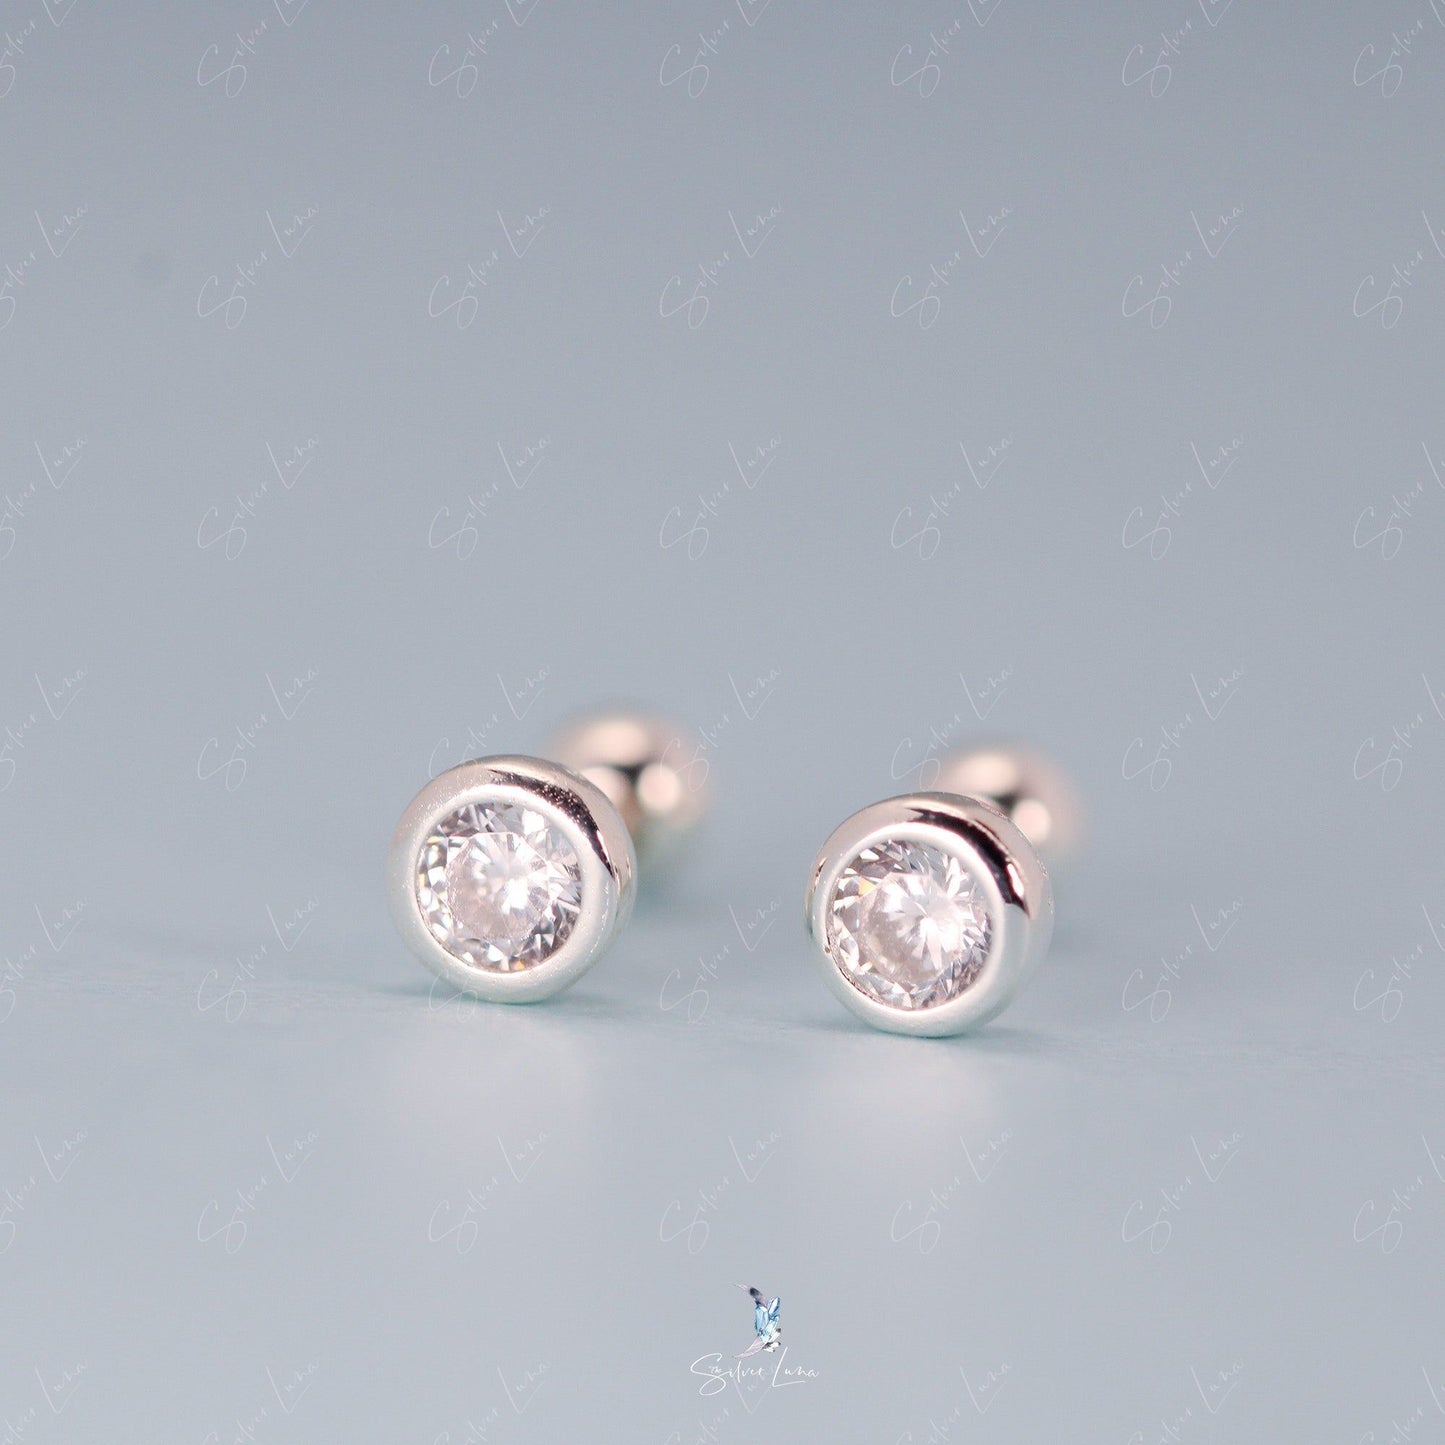 Solitaire cartilage screw back earrings